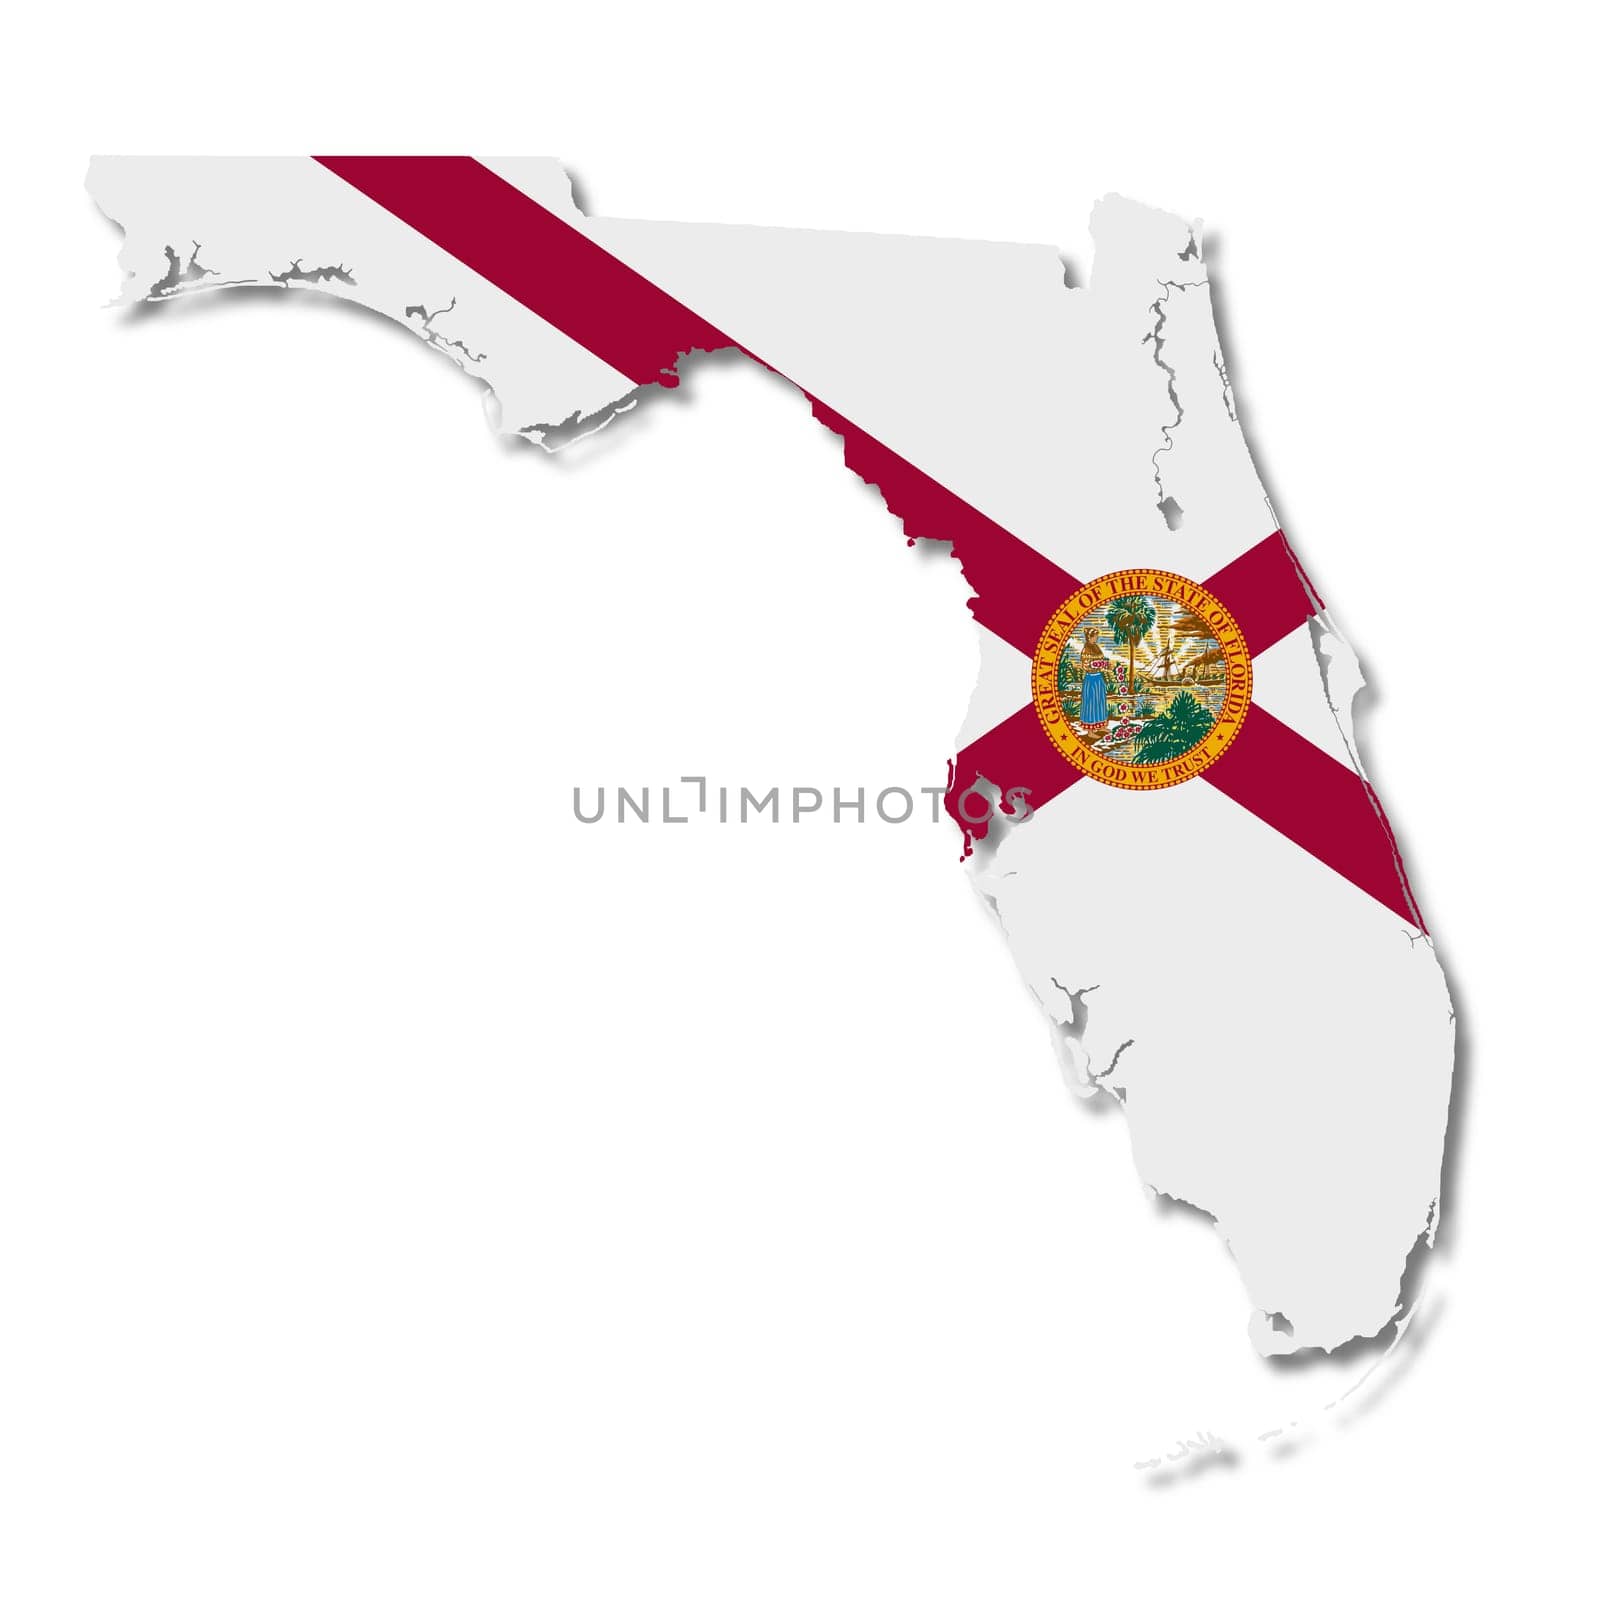 A Florida State Flag Map Illustration with clipping path